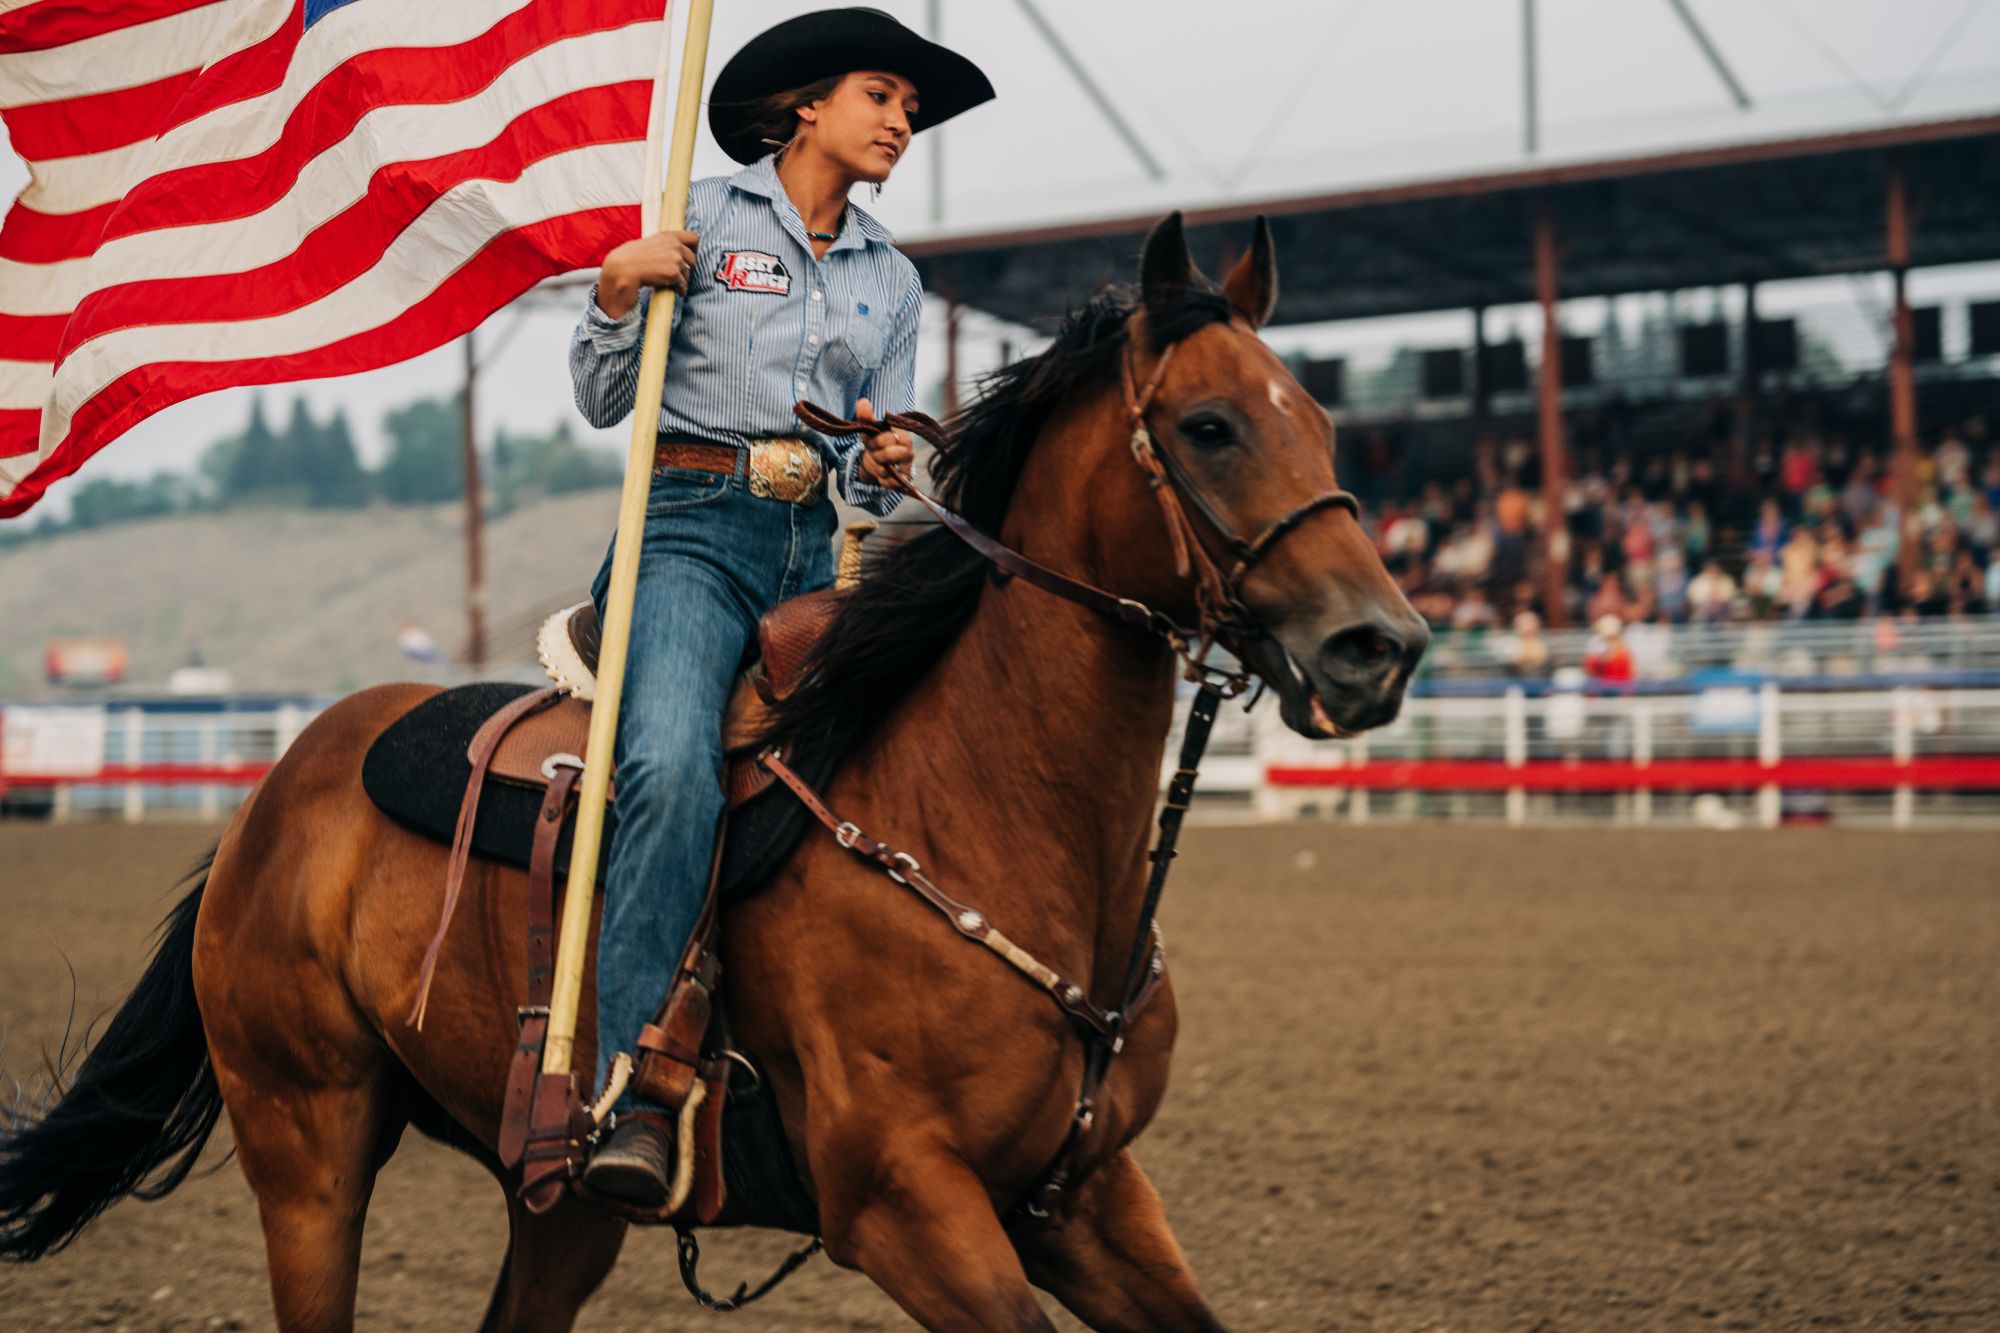 A woman rides a horse while waving an American flag at the Cody Nite Rodeo in Cody Yellowstone